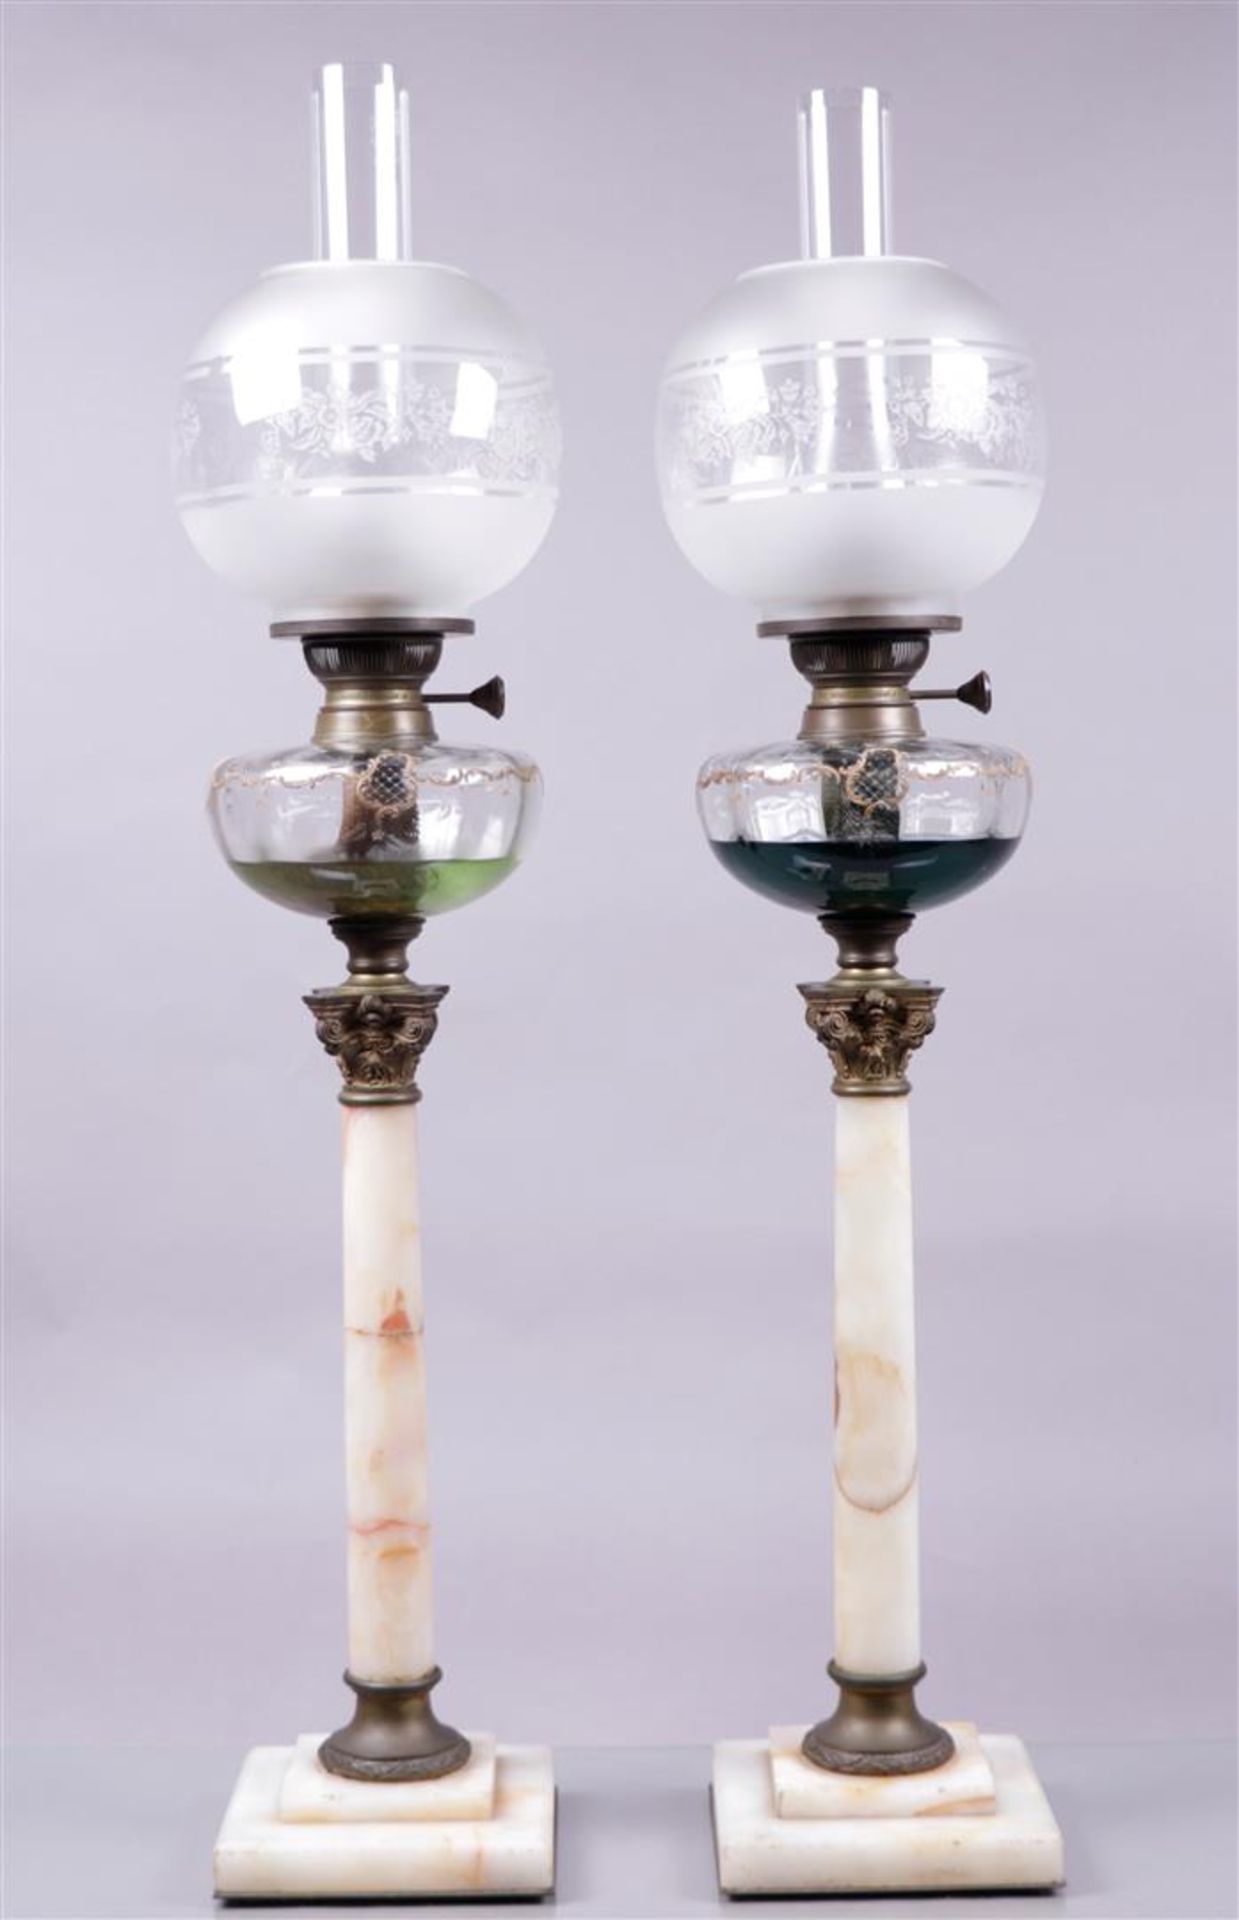 A pair of 19th century cold-painted oil lamps on white marble columns with Corinthian bronze capital